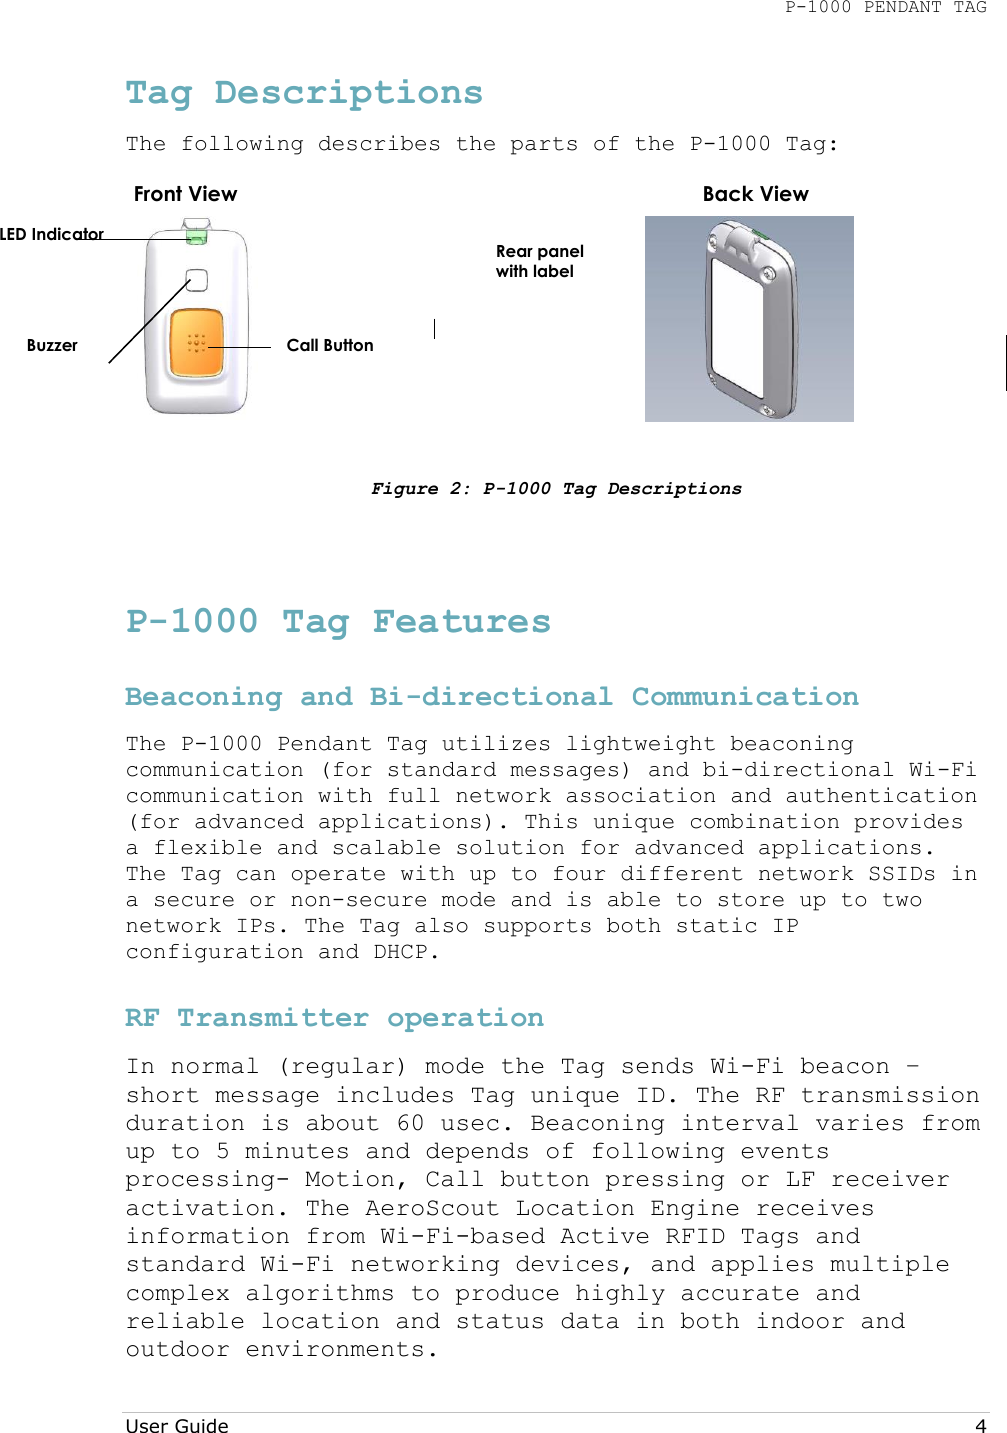 P-1000 PENDANT TAG  User Guide     4 Tag Descriptions The following describes the parts of the P-1000 Tag:     Figure 2: P-1000 Tag Descriptions  P-1000 Tag Features Beaconing and Bi-directional Communication  The P-1000 Pendant Tag utilizes lightweight beaconing communication (for standard messages) and bi-directional Wi-Fi communication with full network association and authentication (for advanced applications). This unique combination provides a flexible and scalable solution for advanced applications. The Tag can operate with up to four different network SSIDs in a secure or non-secure mode and is able to store up to two network IPs. The Tag also supports both static IP configuration and DHCP. RF Transmitter operation  In normal (regular) mode the Tag sends Wi-Fi beacon – short message includes Tag unique ID. The RF transmission duration is about 60 usec. Beaconing interval varies from up to 5 minutes and depends of following events processing- Motion, Call button pressing or LF receiver activation. The AeroScout Location Engine receives information from Wi-Fi-based Active RFID Tags and standard Wi-Fi networking devices, and applies multiple complex algorithms to produce highly accurate and reliable location and status data in both indoor and outdoor environments. Front View Back View LED Indicator Buzzer  Call Button  Rear panel with label 